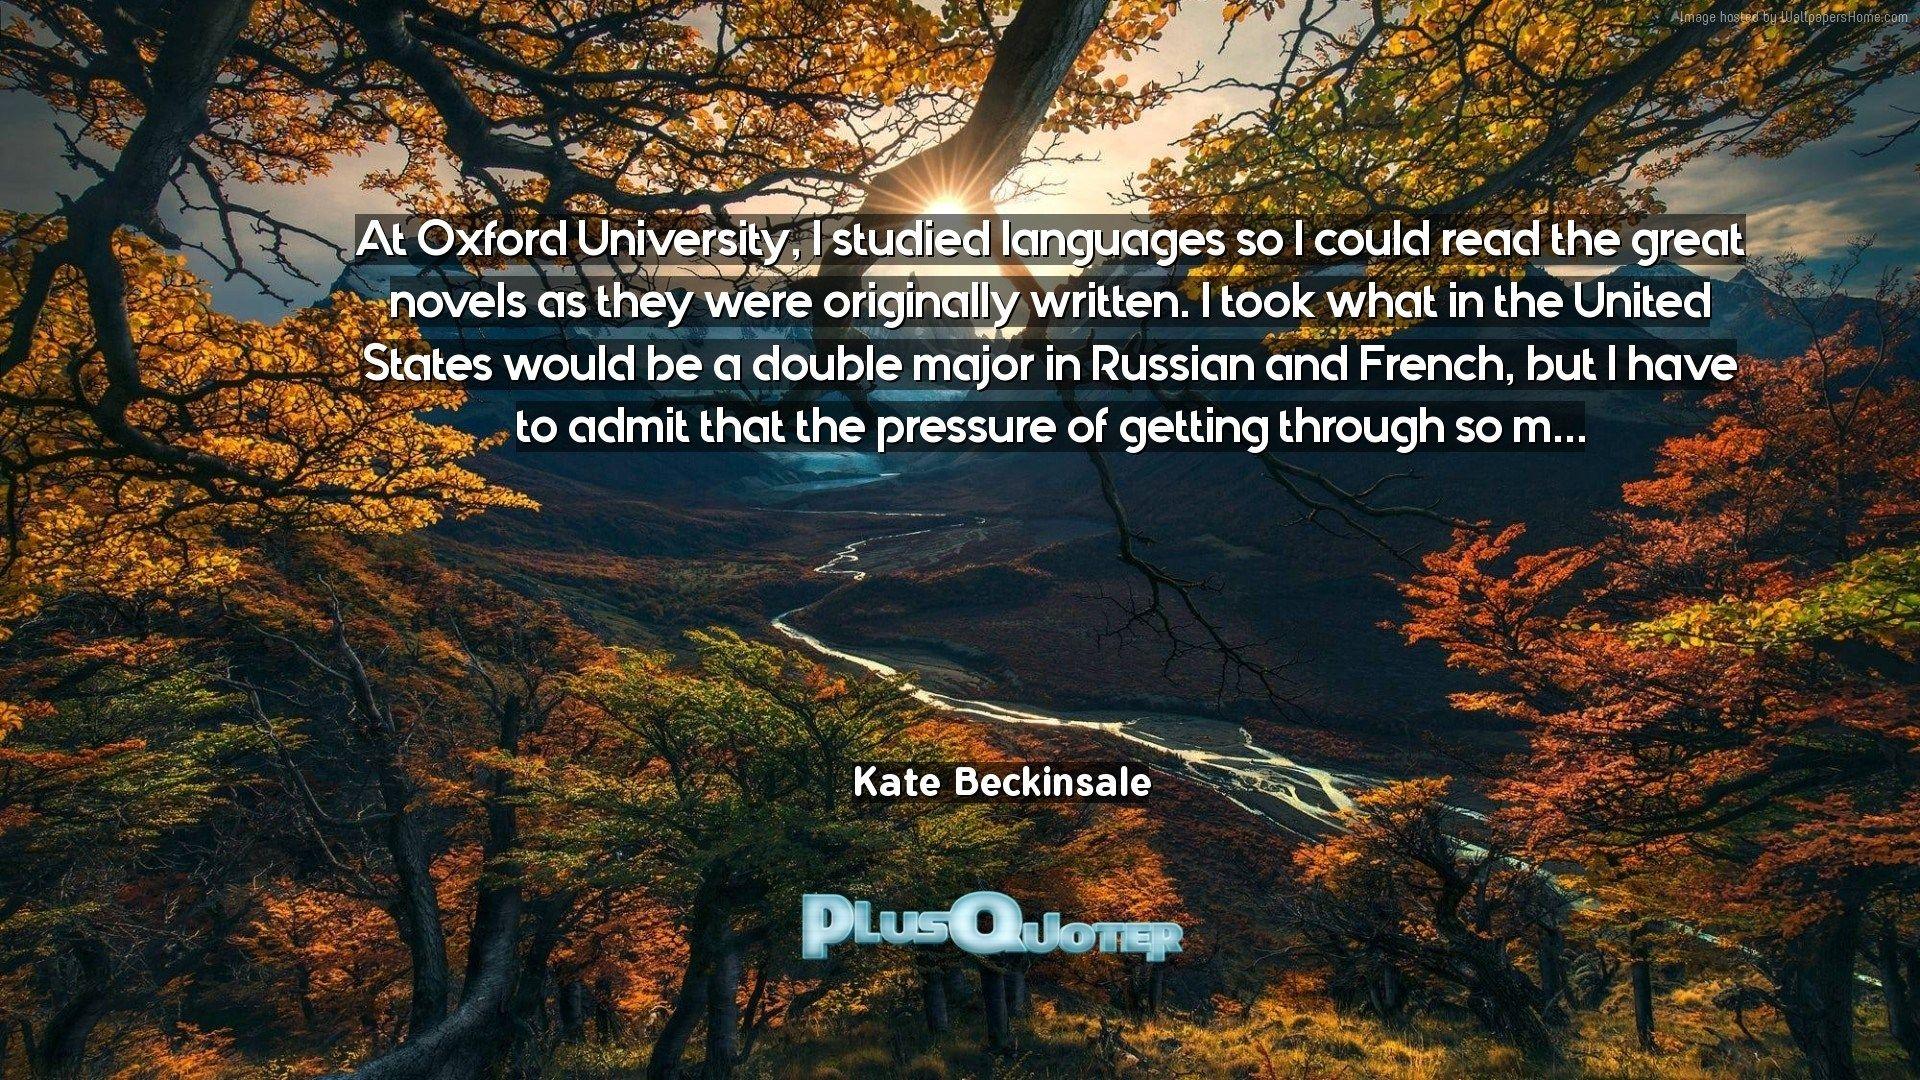 At Oxford University, I studied languages so I could read the great